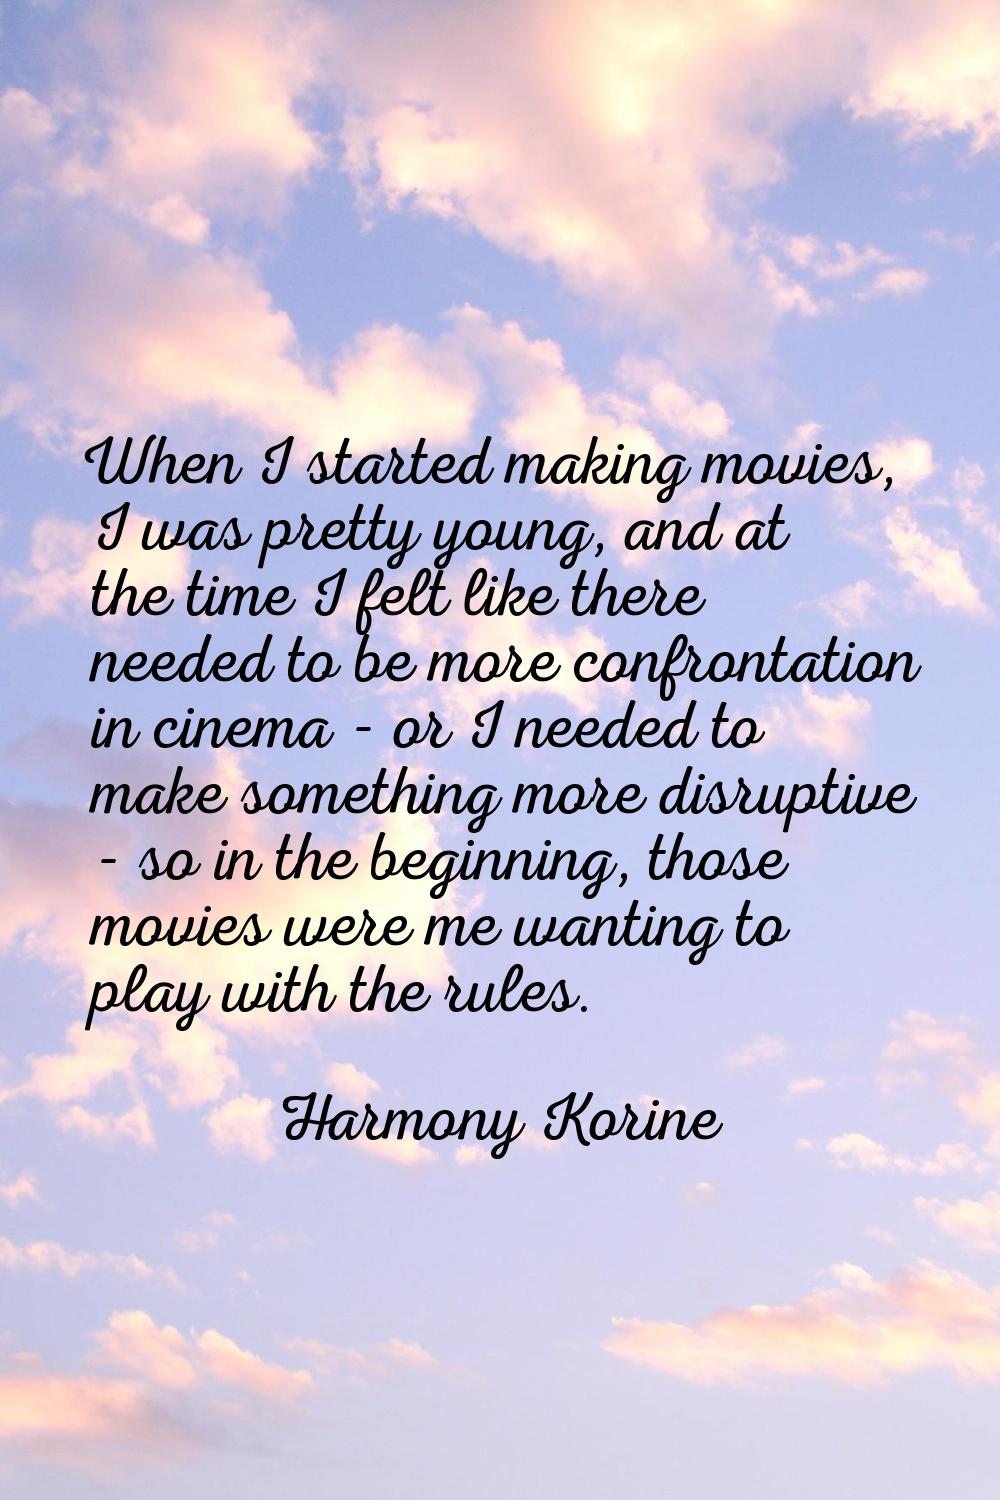 When I started making movies, I was pretty young, and at the time I felt like there needed to be mo